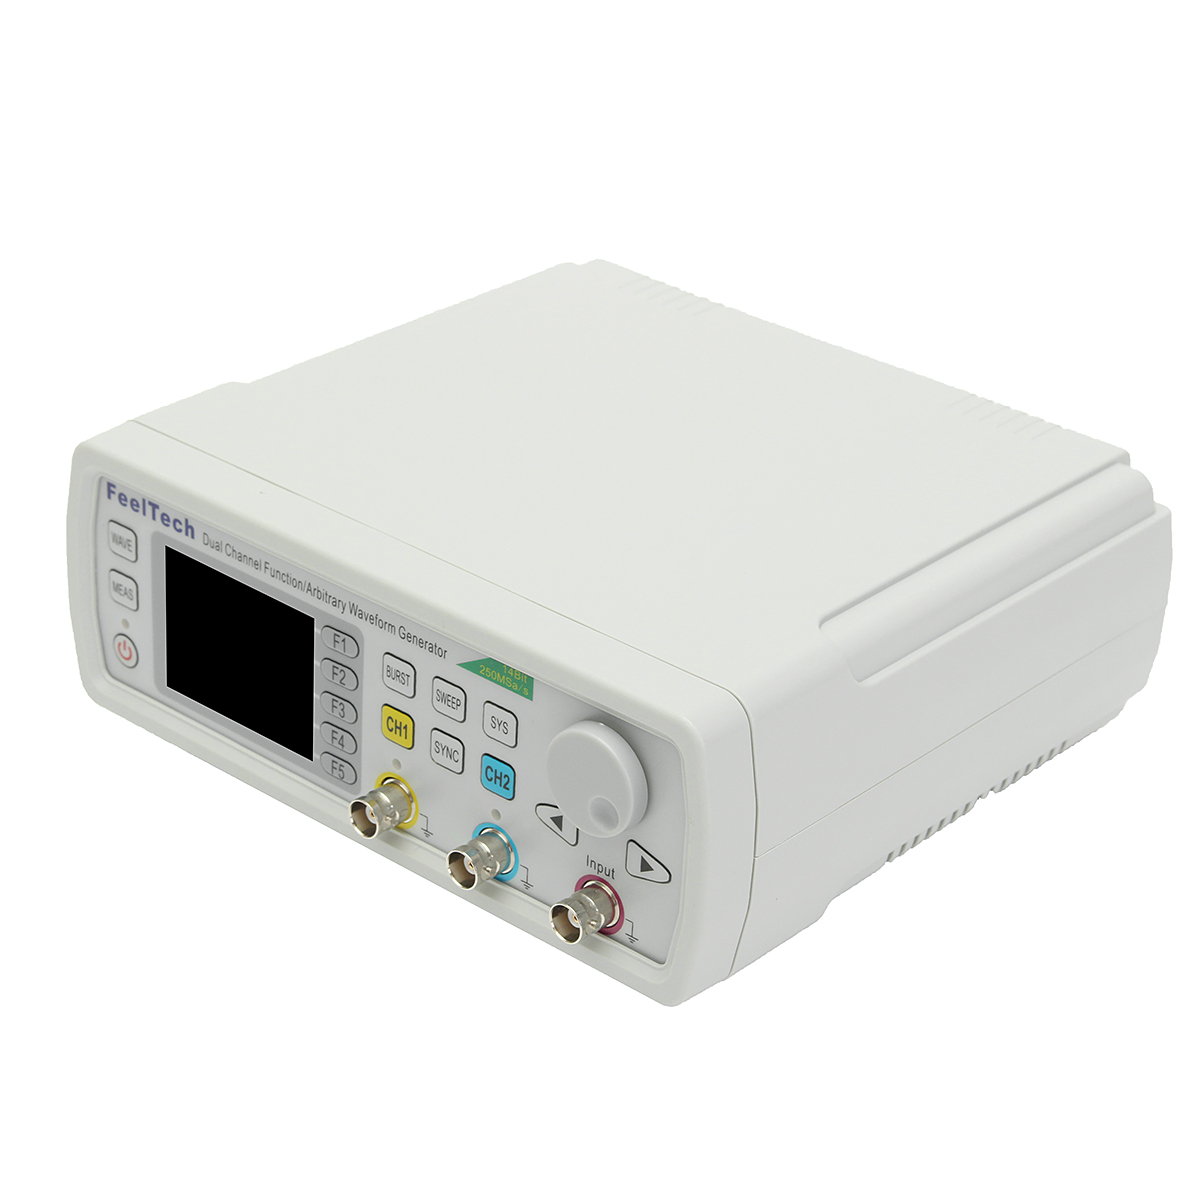 FY6600 Digital 12-60MHz Dual Channel DDS Function Arbitrary Waveform Signal Generator Frequency Meter 40